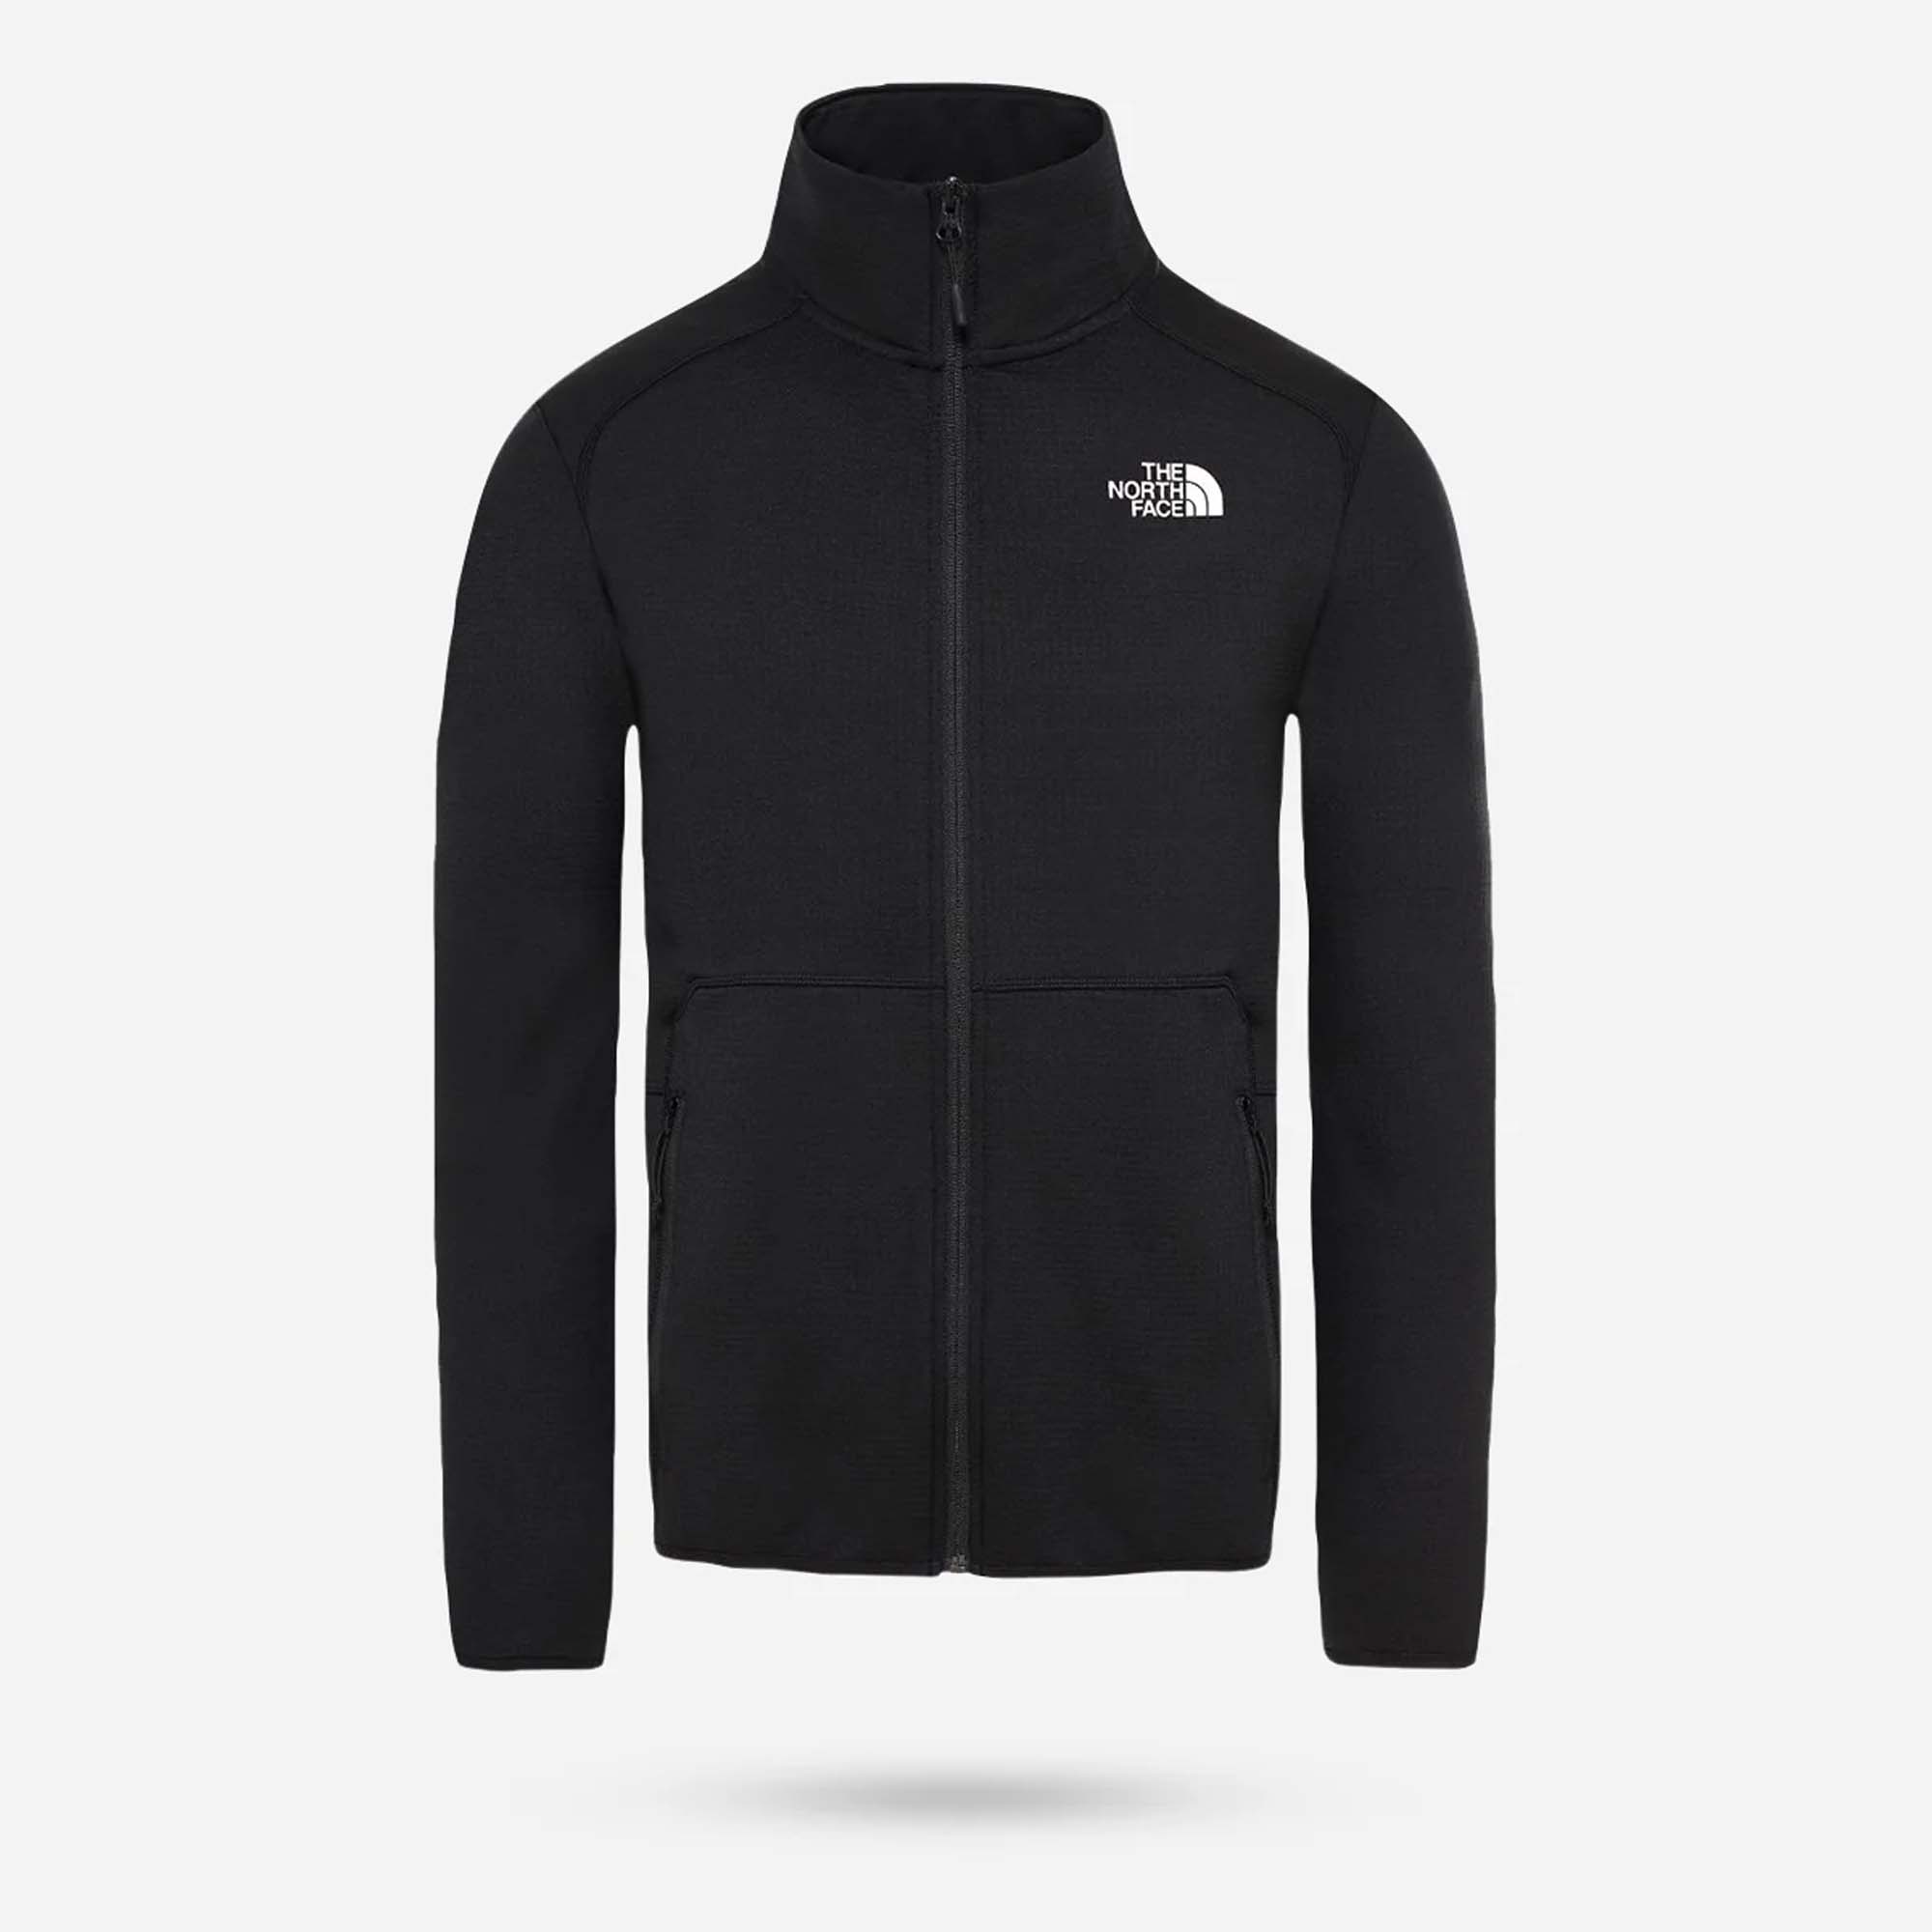 THE NORTH FACE m quest fz jkt